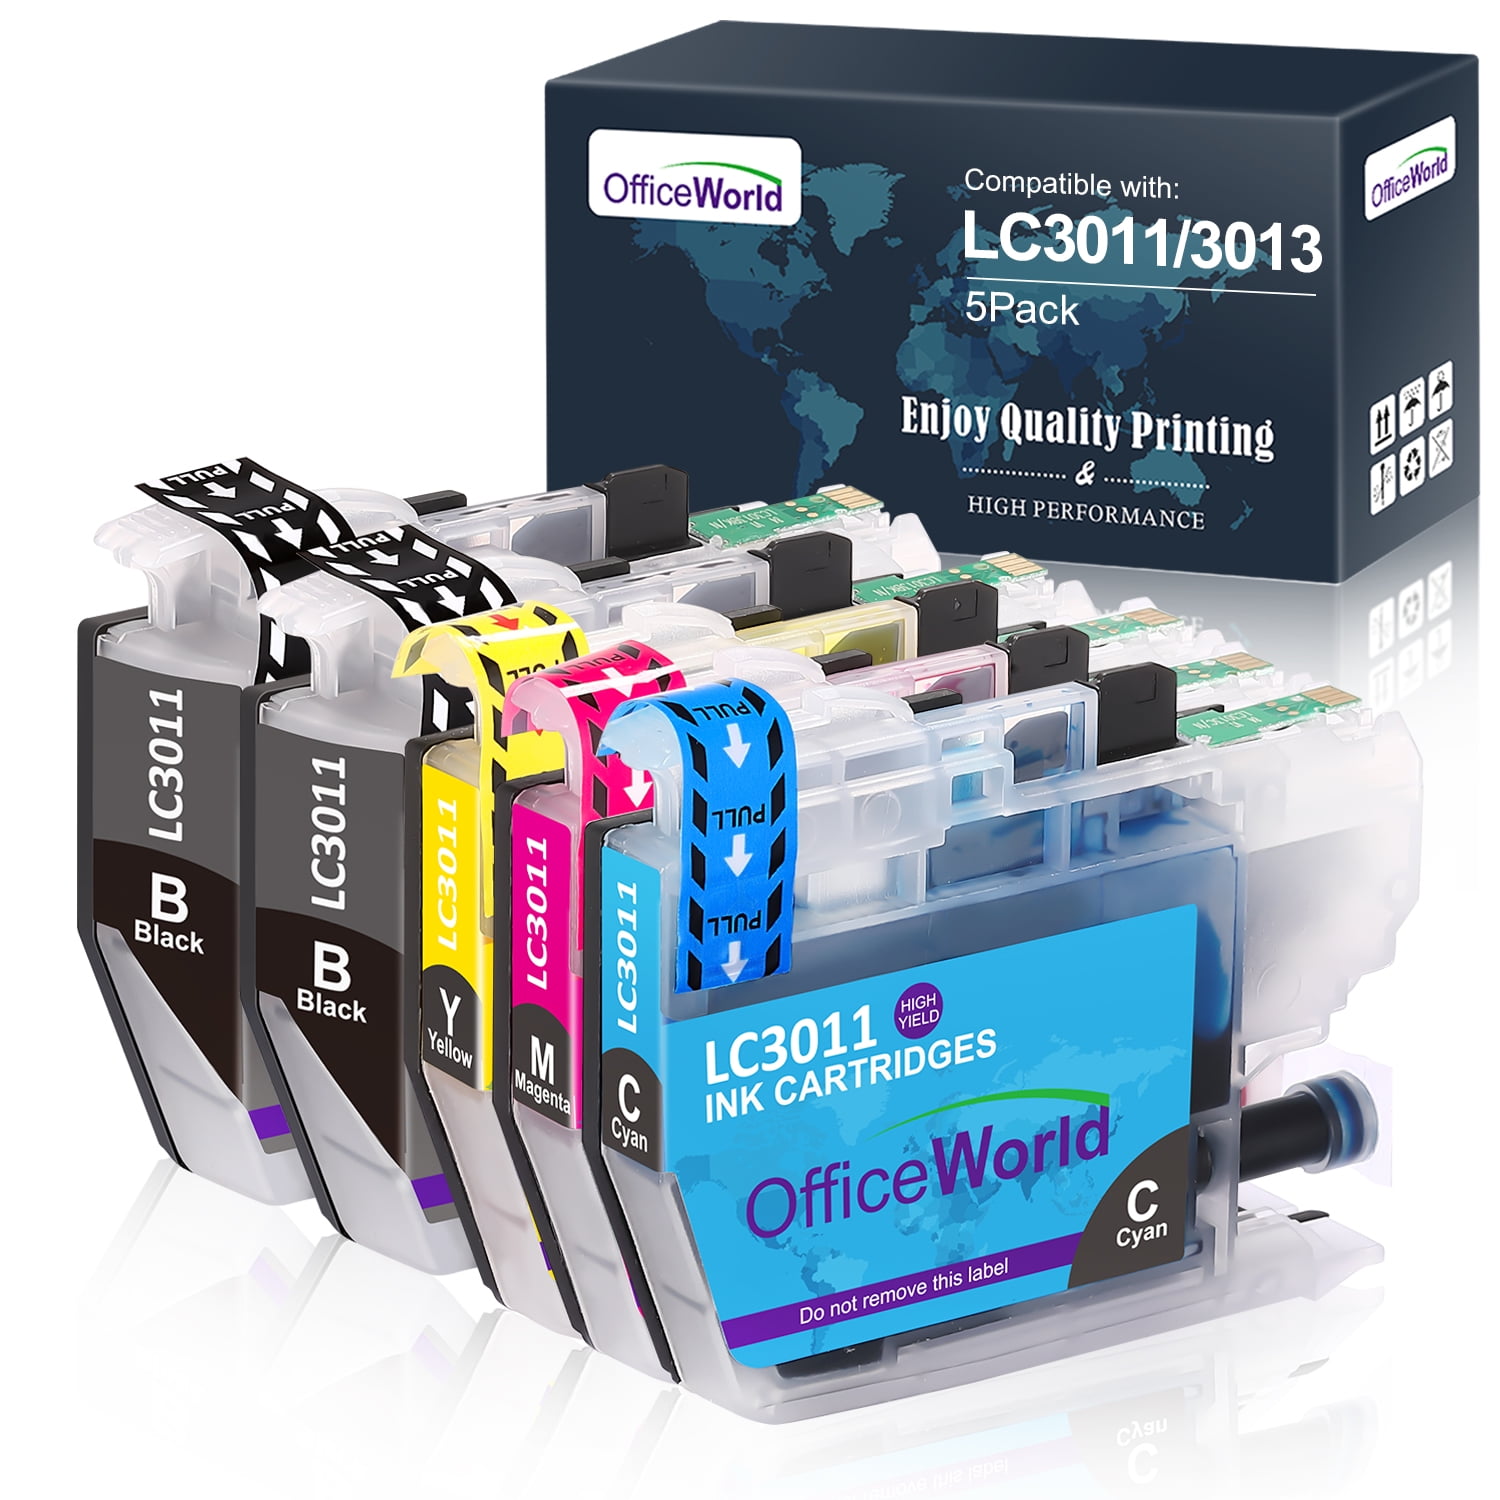 Impuro Buena voluntad colección OfficeWorld LC3011 LC3013 Ink Cartridge Compatible with Brother MFC-J491DW  MFC-J895DW MFC-J690DW MFC-J497DW Printer 5Pack, Black And Color -  Walmart.com